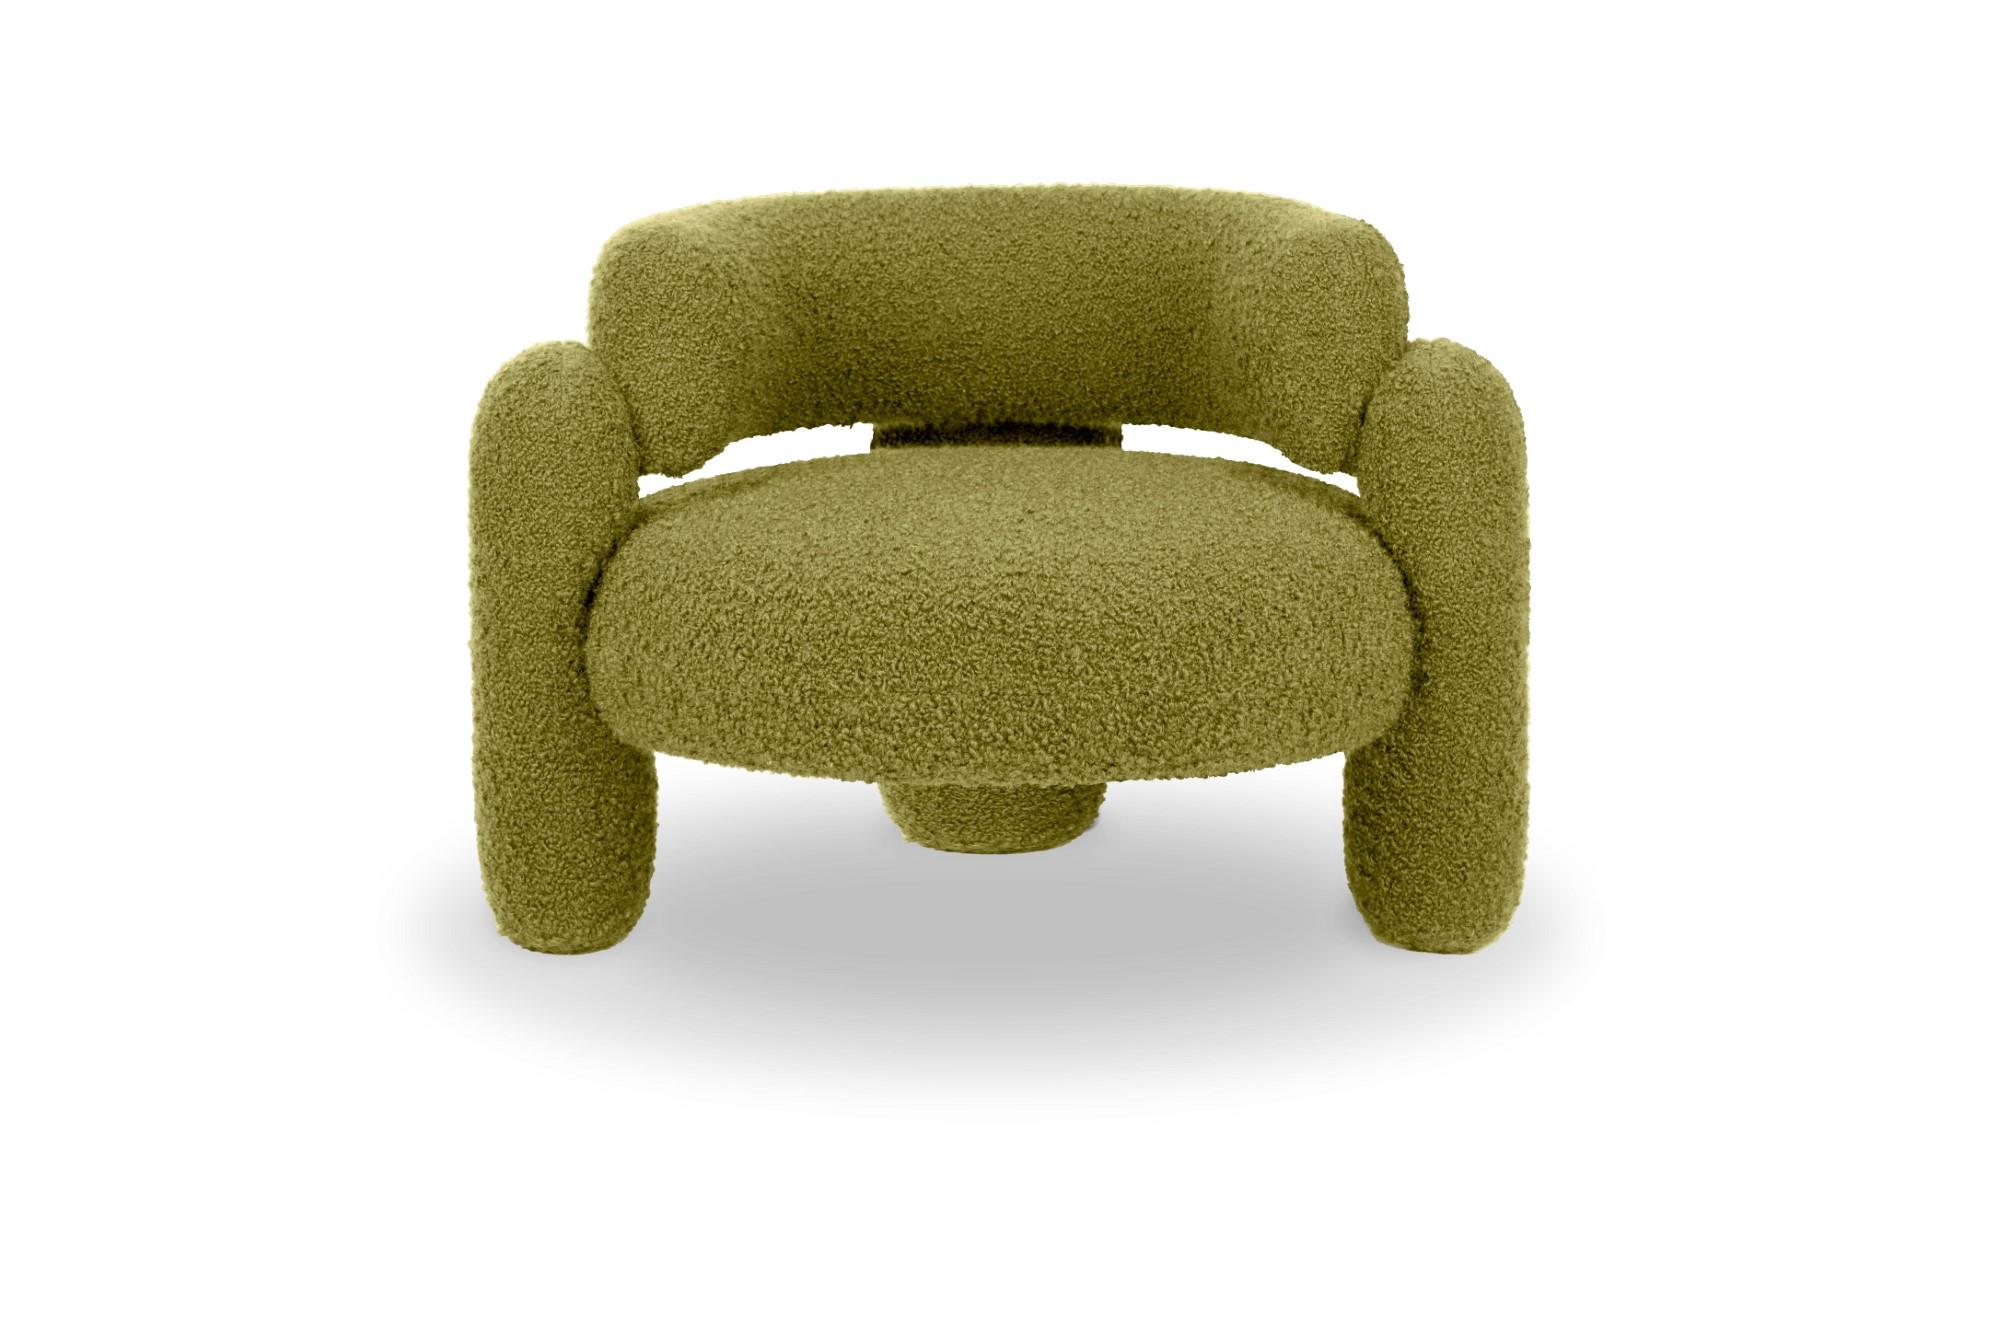 Embrace cormo acacia Armchair by Royal Stranger
Dimensions: W 96 x D 85 x H 68 cm.
Different upholstery colors and finishes are available.
Materials: Upholstery.

Featuring an enfolding composition of geometrical shapes, the Embrace Armchair